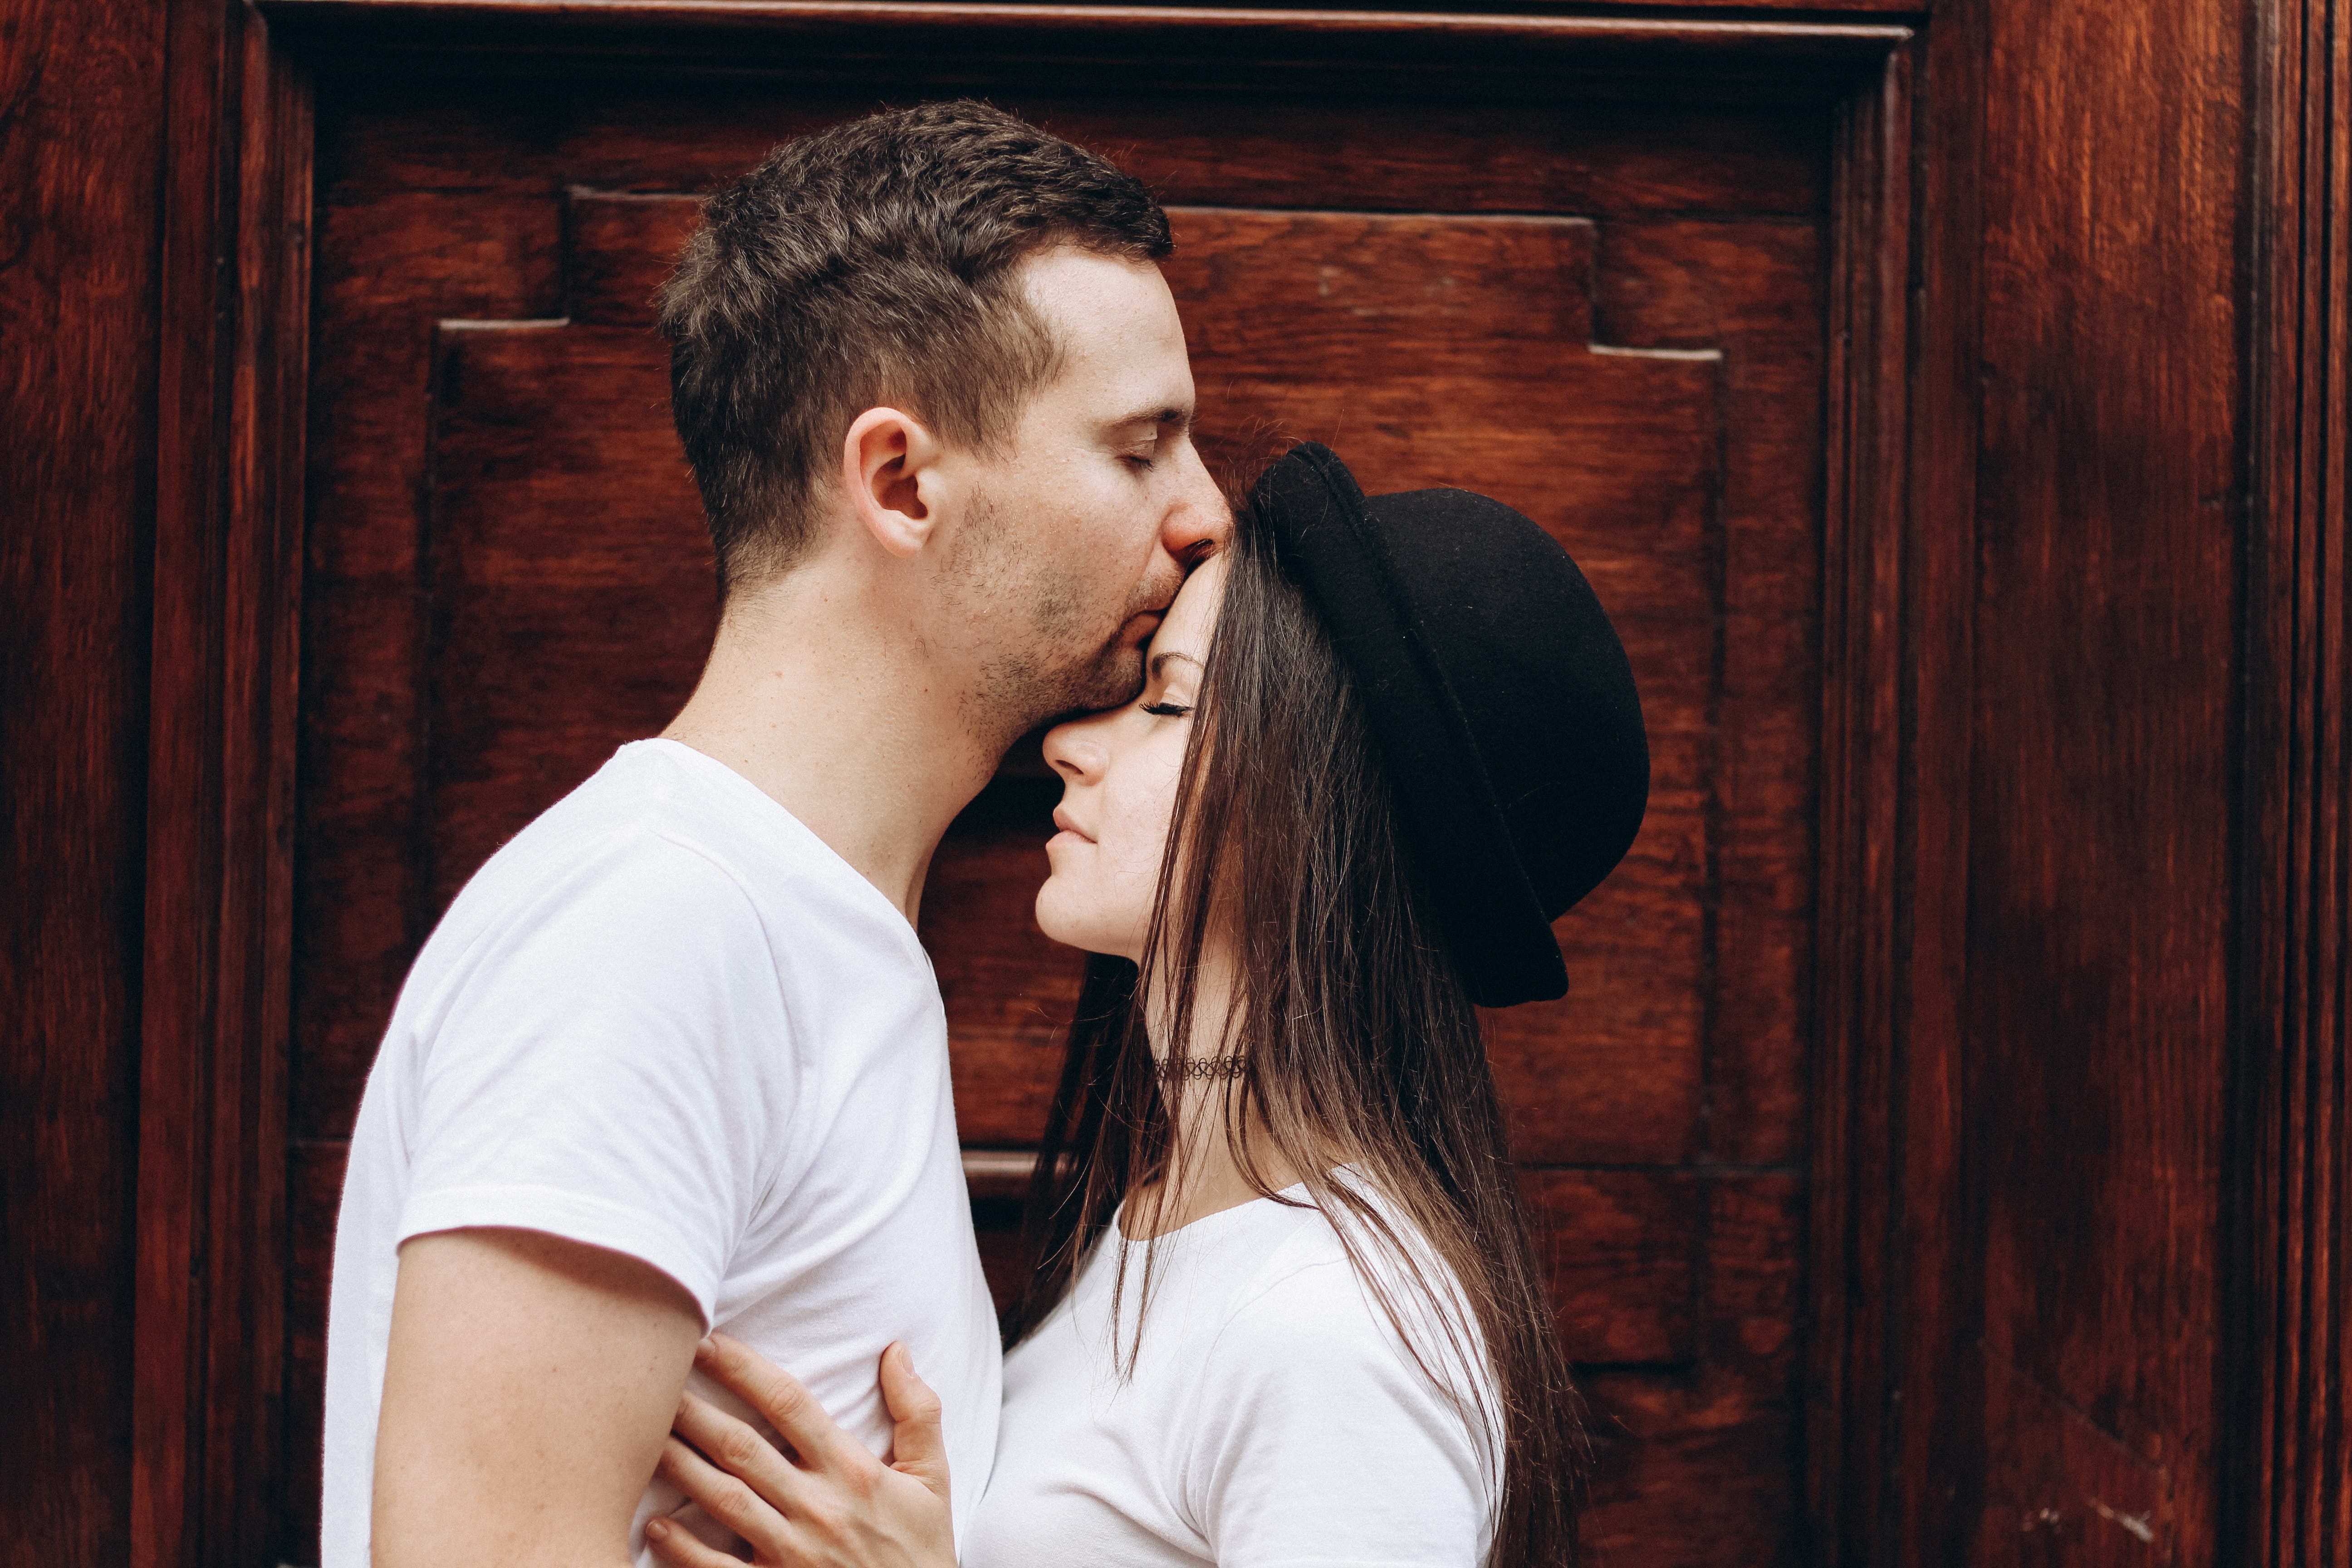 A man kissing a woman on the forehead. | Source: Unsplash